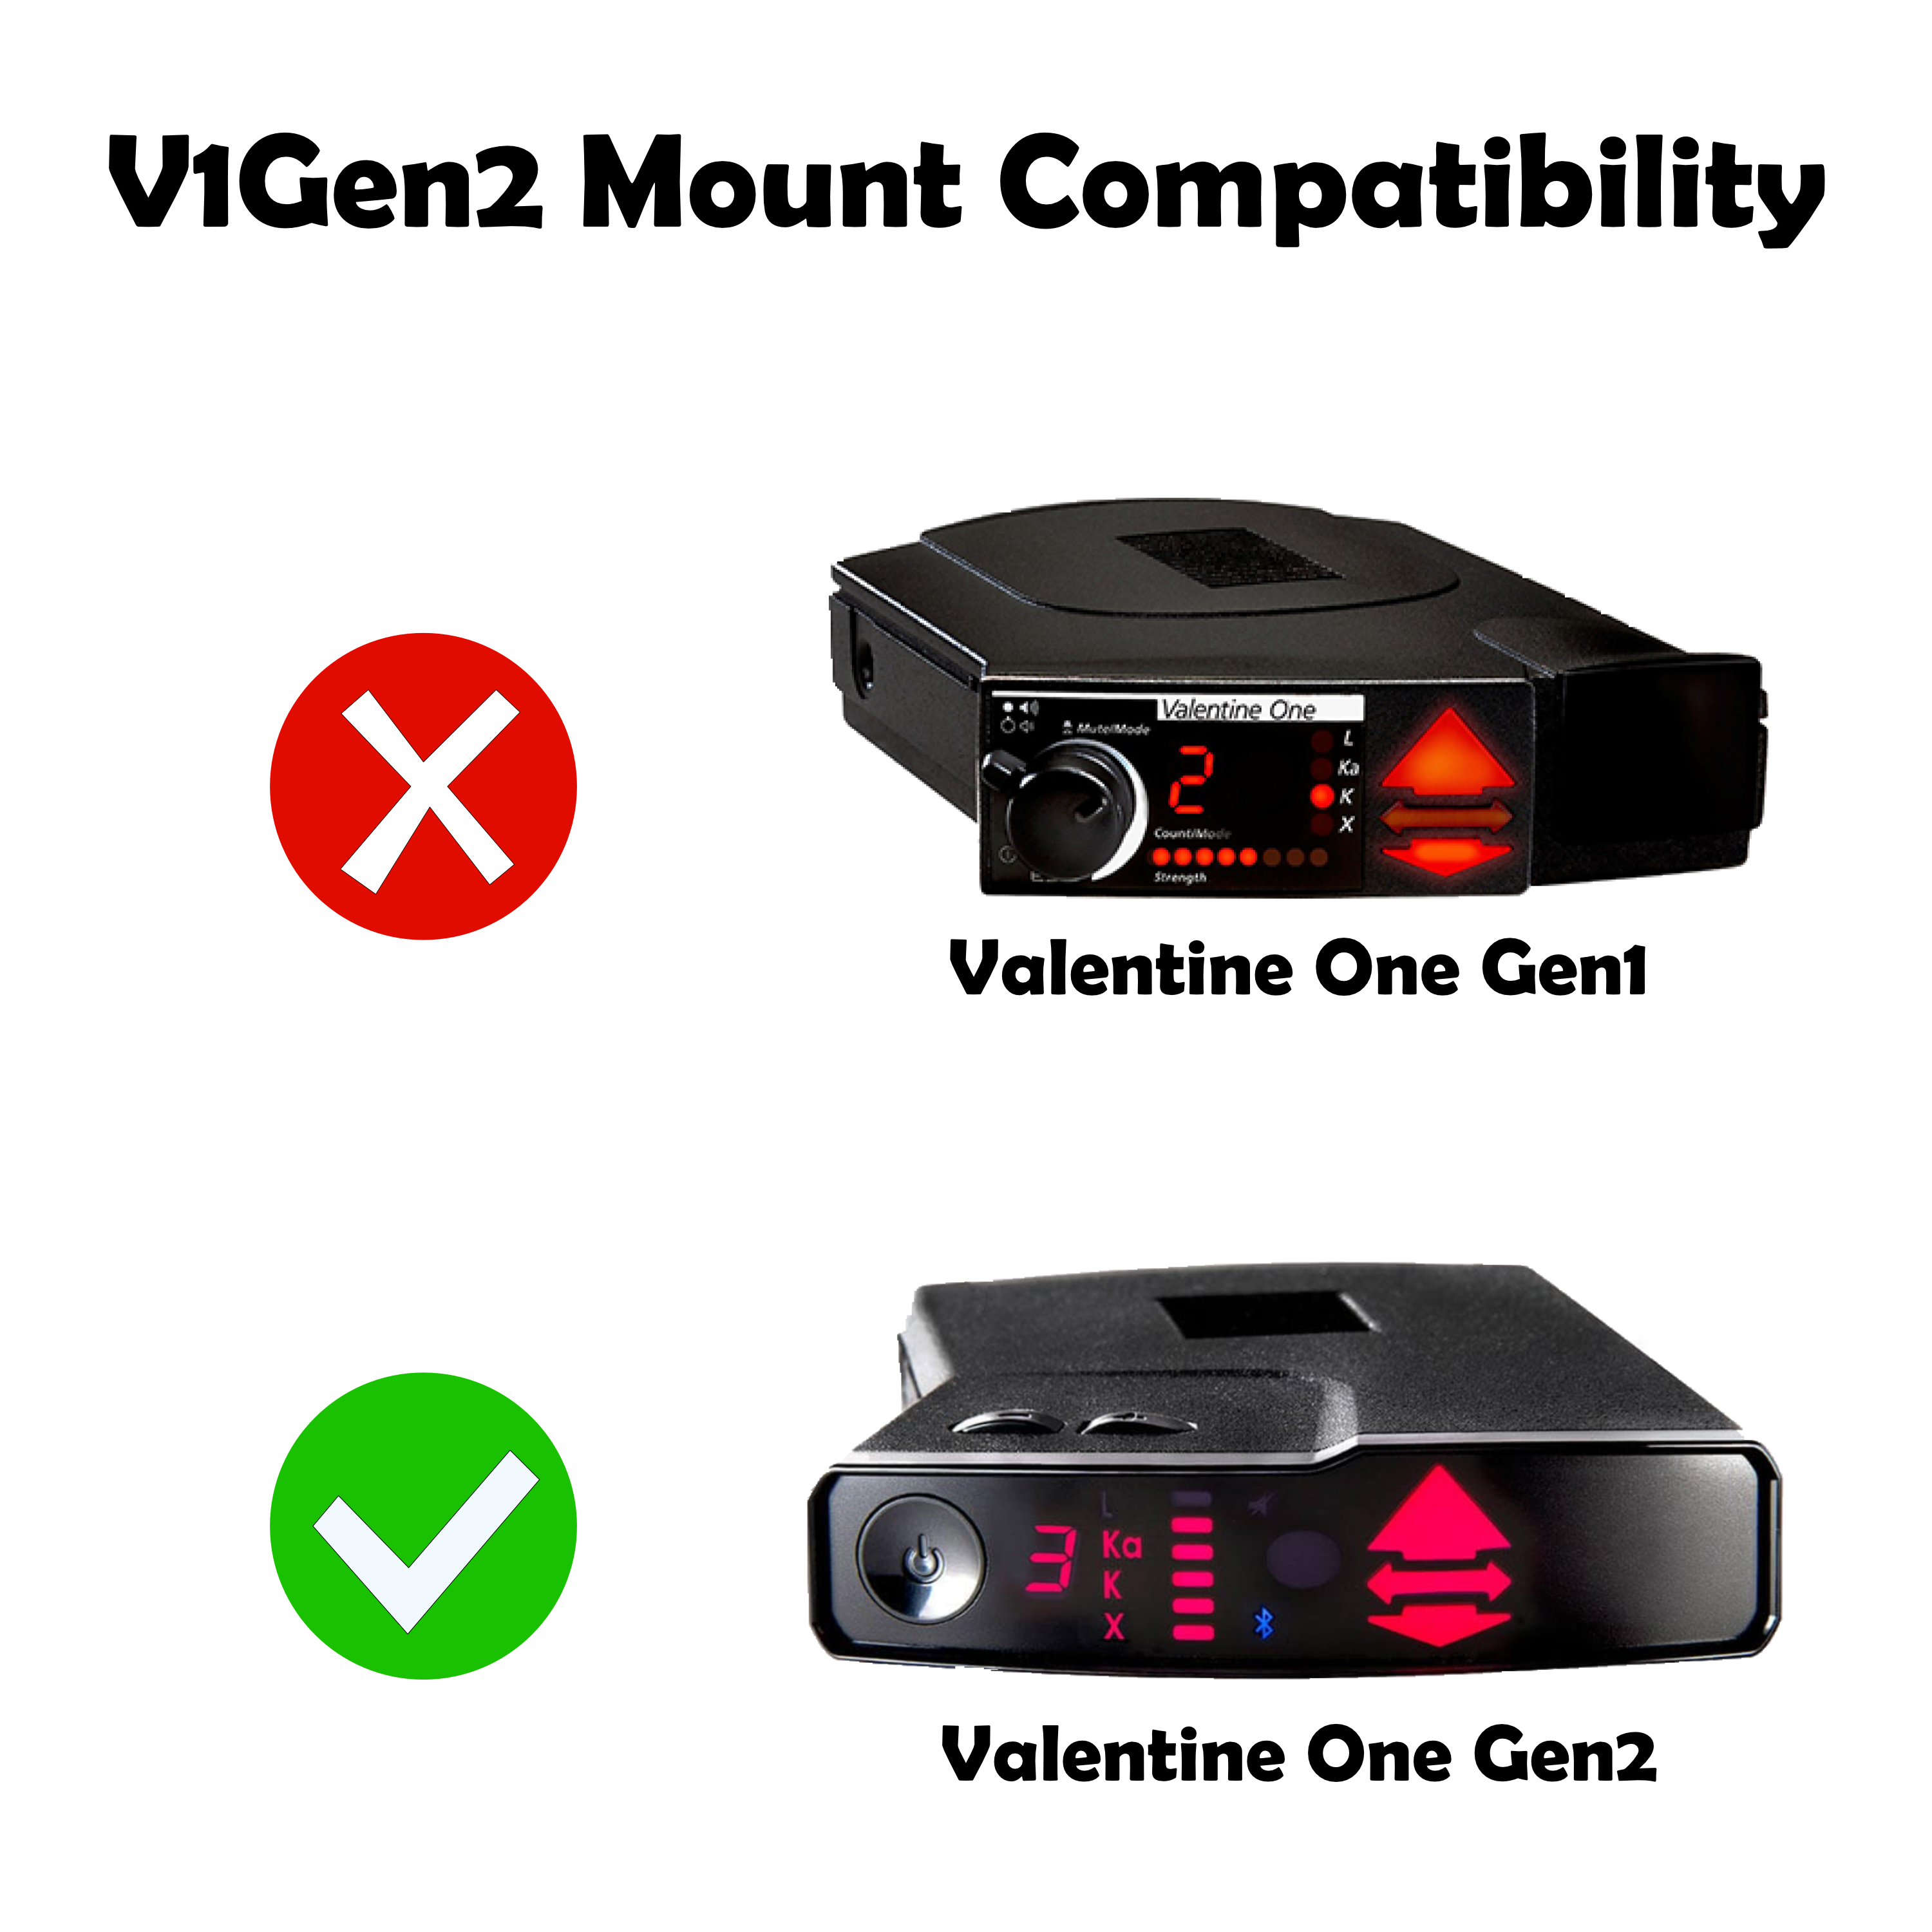 Image showing the V1Gen2 radar it is compatible with